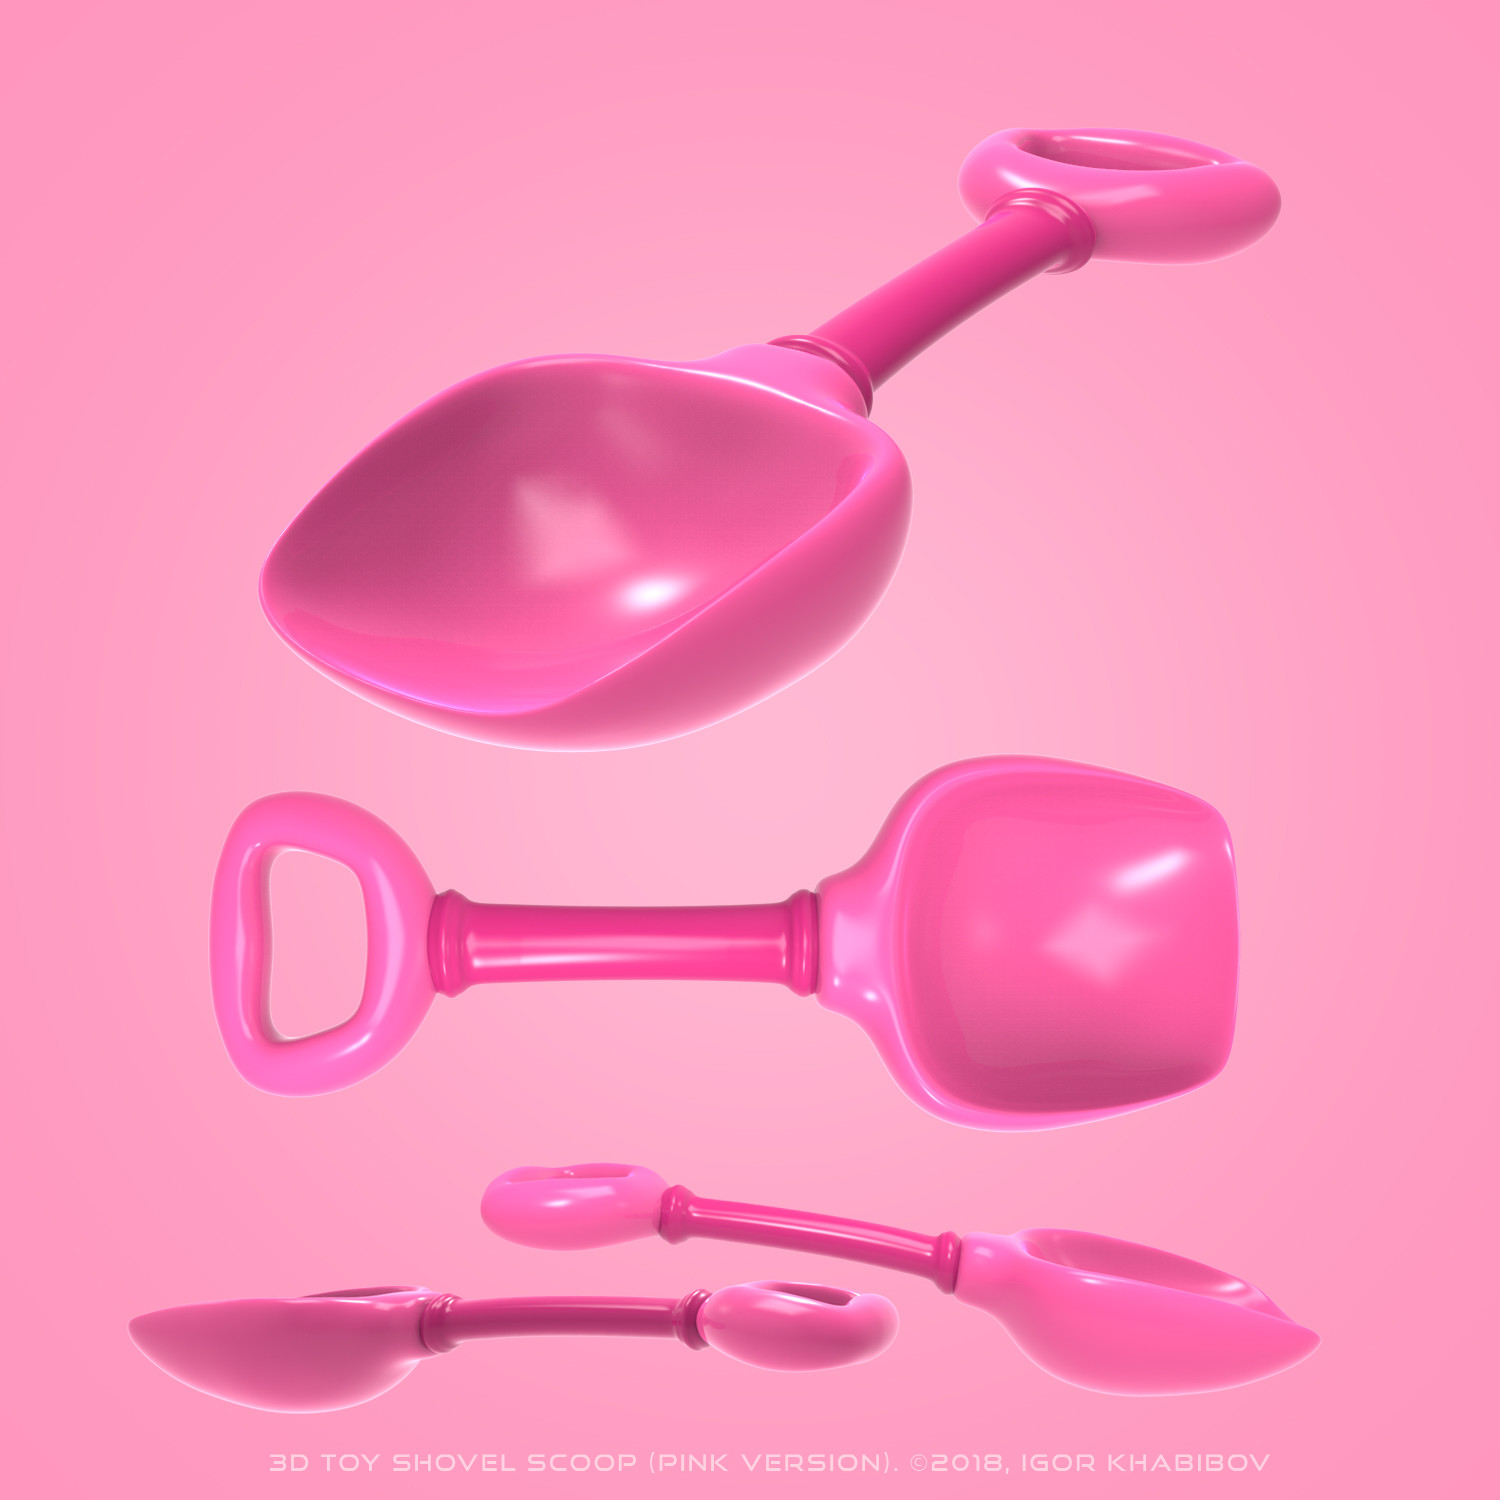 3D Toy Shovel Scoop
Contest winner (1st place) at DesignCrowd. 